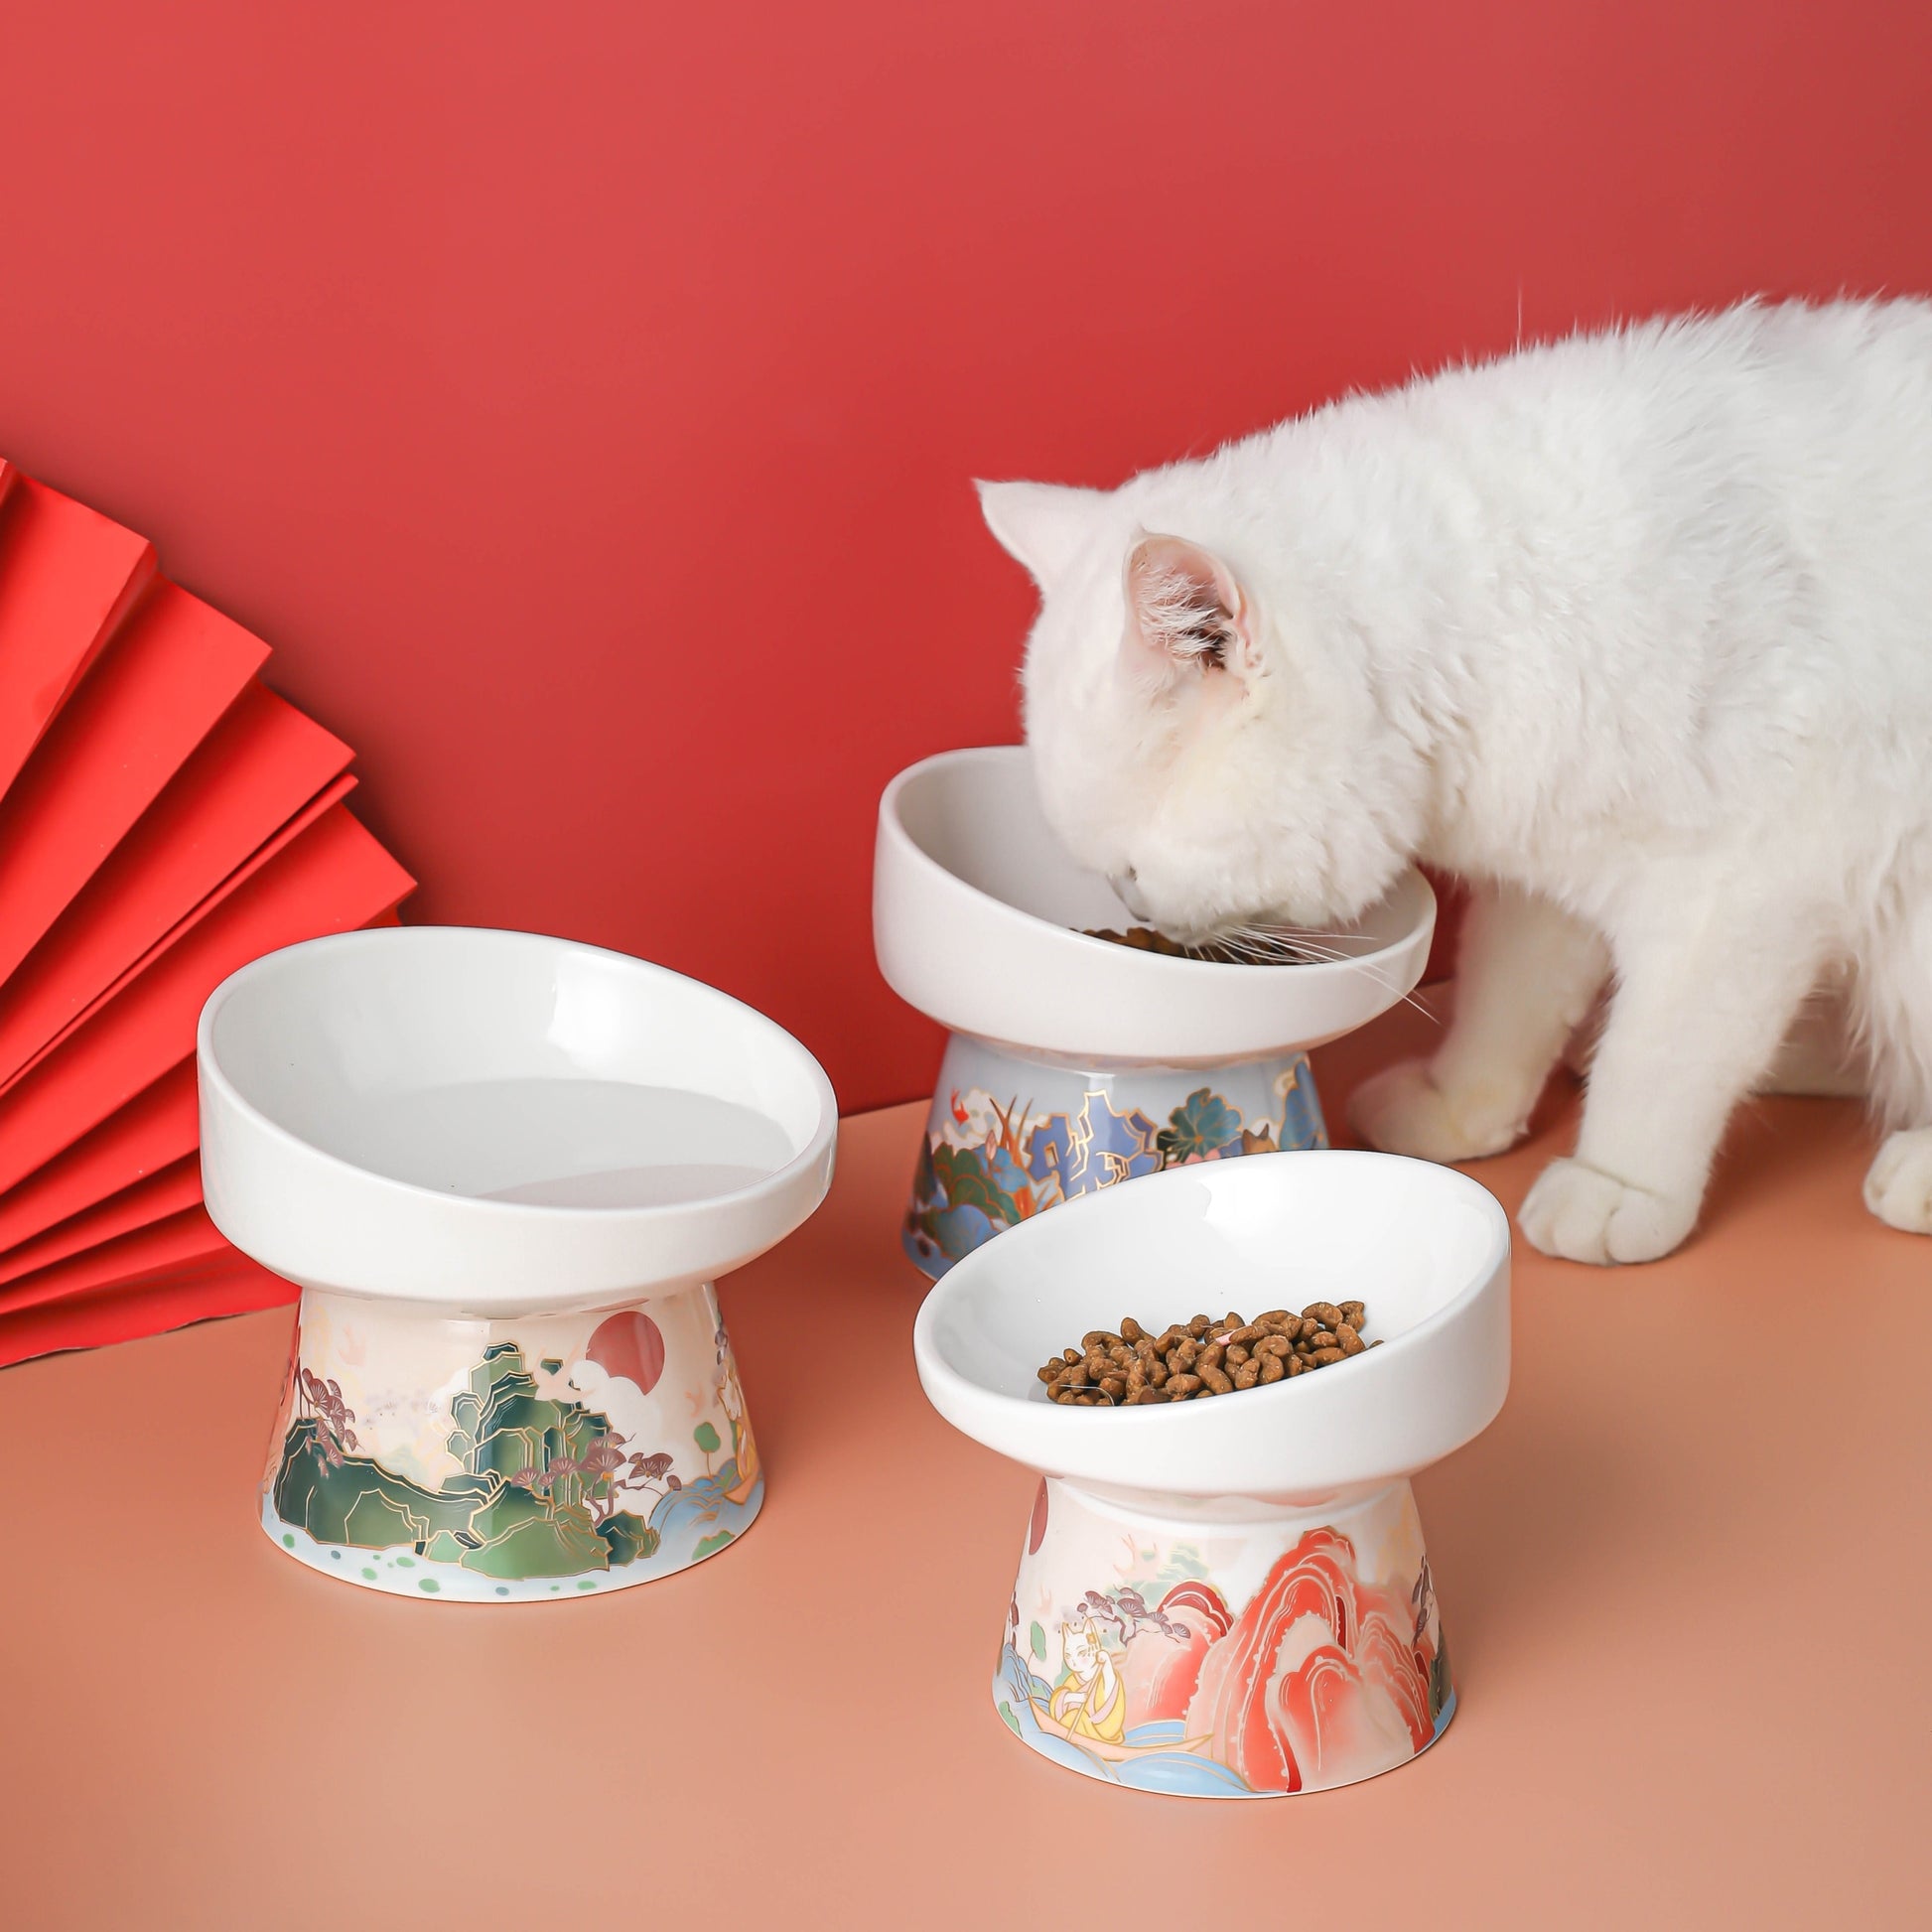 Japanese Style Pet Feeder Bone China Pet Feeder Elegant Pet Dining Non-Slip Base Feeder Pet Feeder with Japanese Design Durable Bone China Feeder Stylish Pet Dining Accessory Easy-to-Clean Pet Feeder Pet Feeder for Multiple Sizes Elevate Pet Mealtime